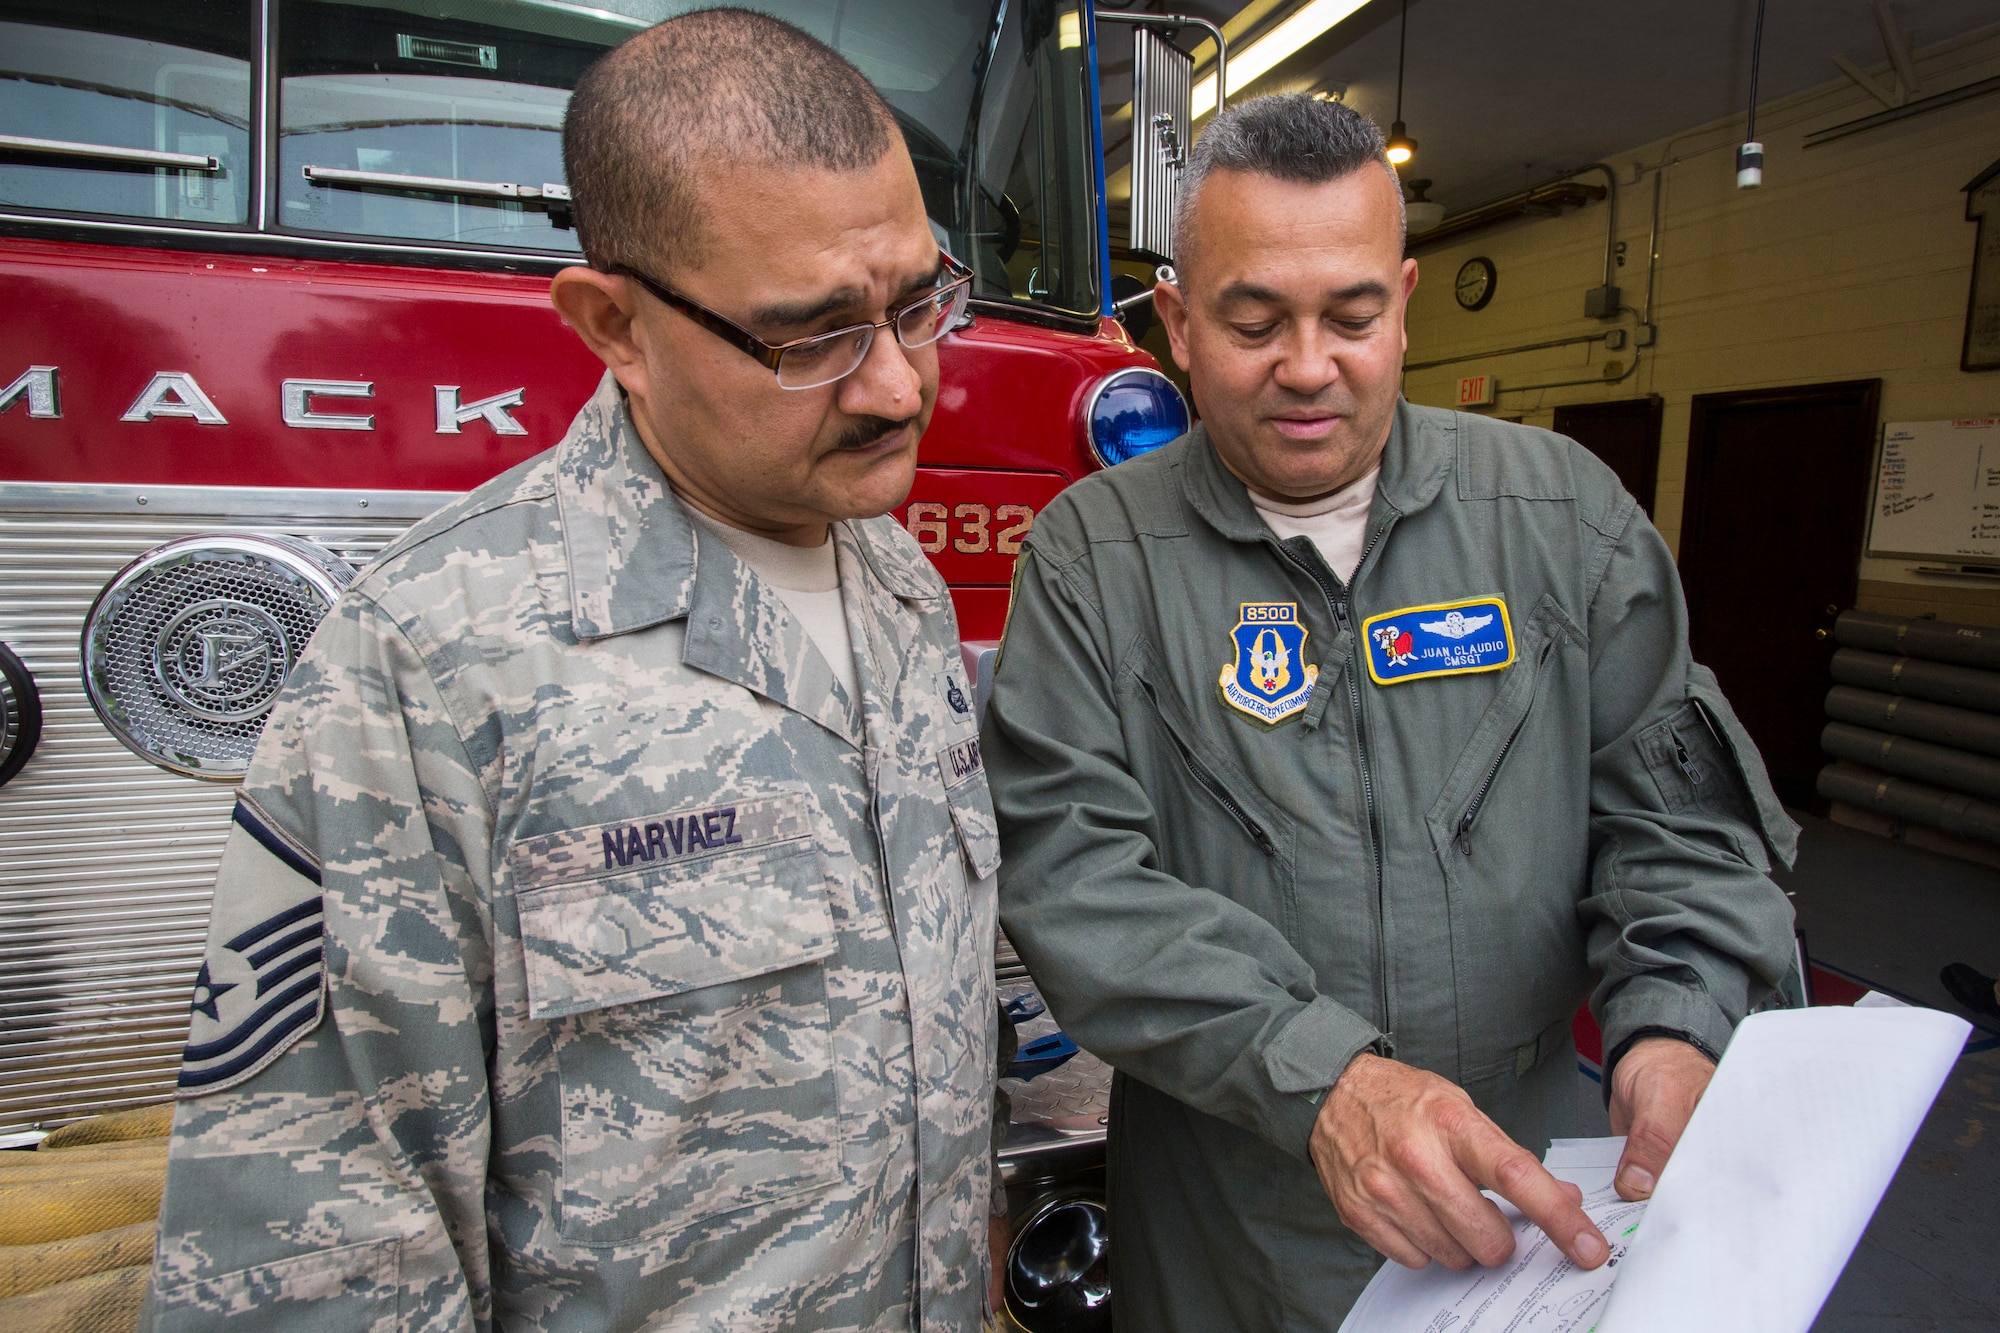 Master Sgt. Jorge A. Narvaez, left, 108th Wing Security Forces, New Jersey Air National Guard, listens as Chief Master Sgt. Juan Claudio, a loadmaster with the 514th Air Mobility Wing, Air Force Reserve, reviews the final list of measurements for a 1982 Mack 1250 GPM pumper fire truck at Mercer Engine No. 3 fire department in Princeton, N.J., July 13, 2016. Narvaez was instrumental in getting the truck donated to a group of volunteer firefighters in Managua, Nicaragua through the Denton Program, which allows U.S. citizens and organizations to use space available on military cargo aircraft to transport humanitarian goods to countries in need. (U.S. Air National Guard photo by Master Sgt. Mark C. Olsen/Released)